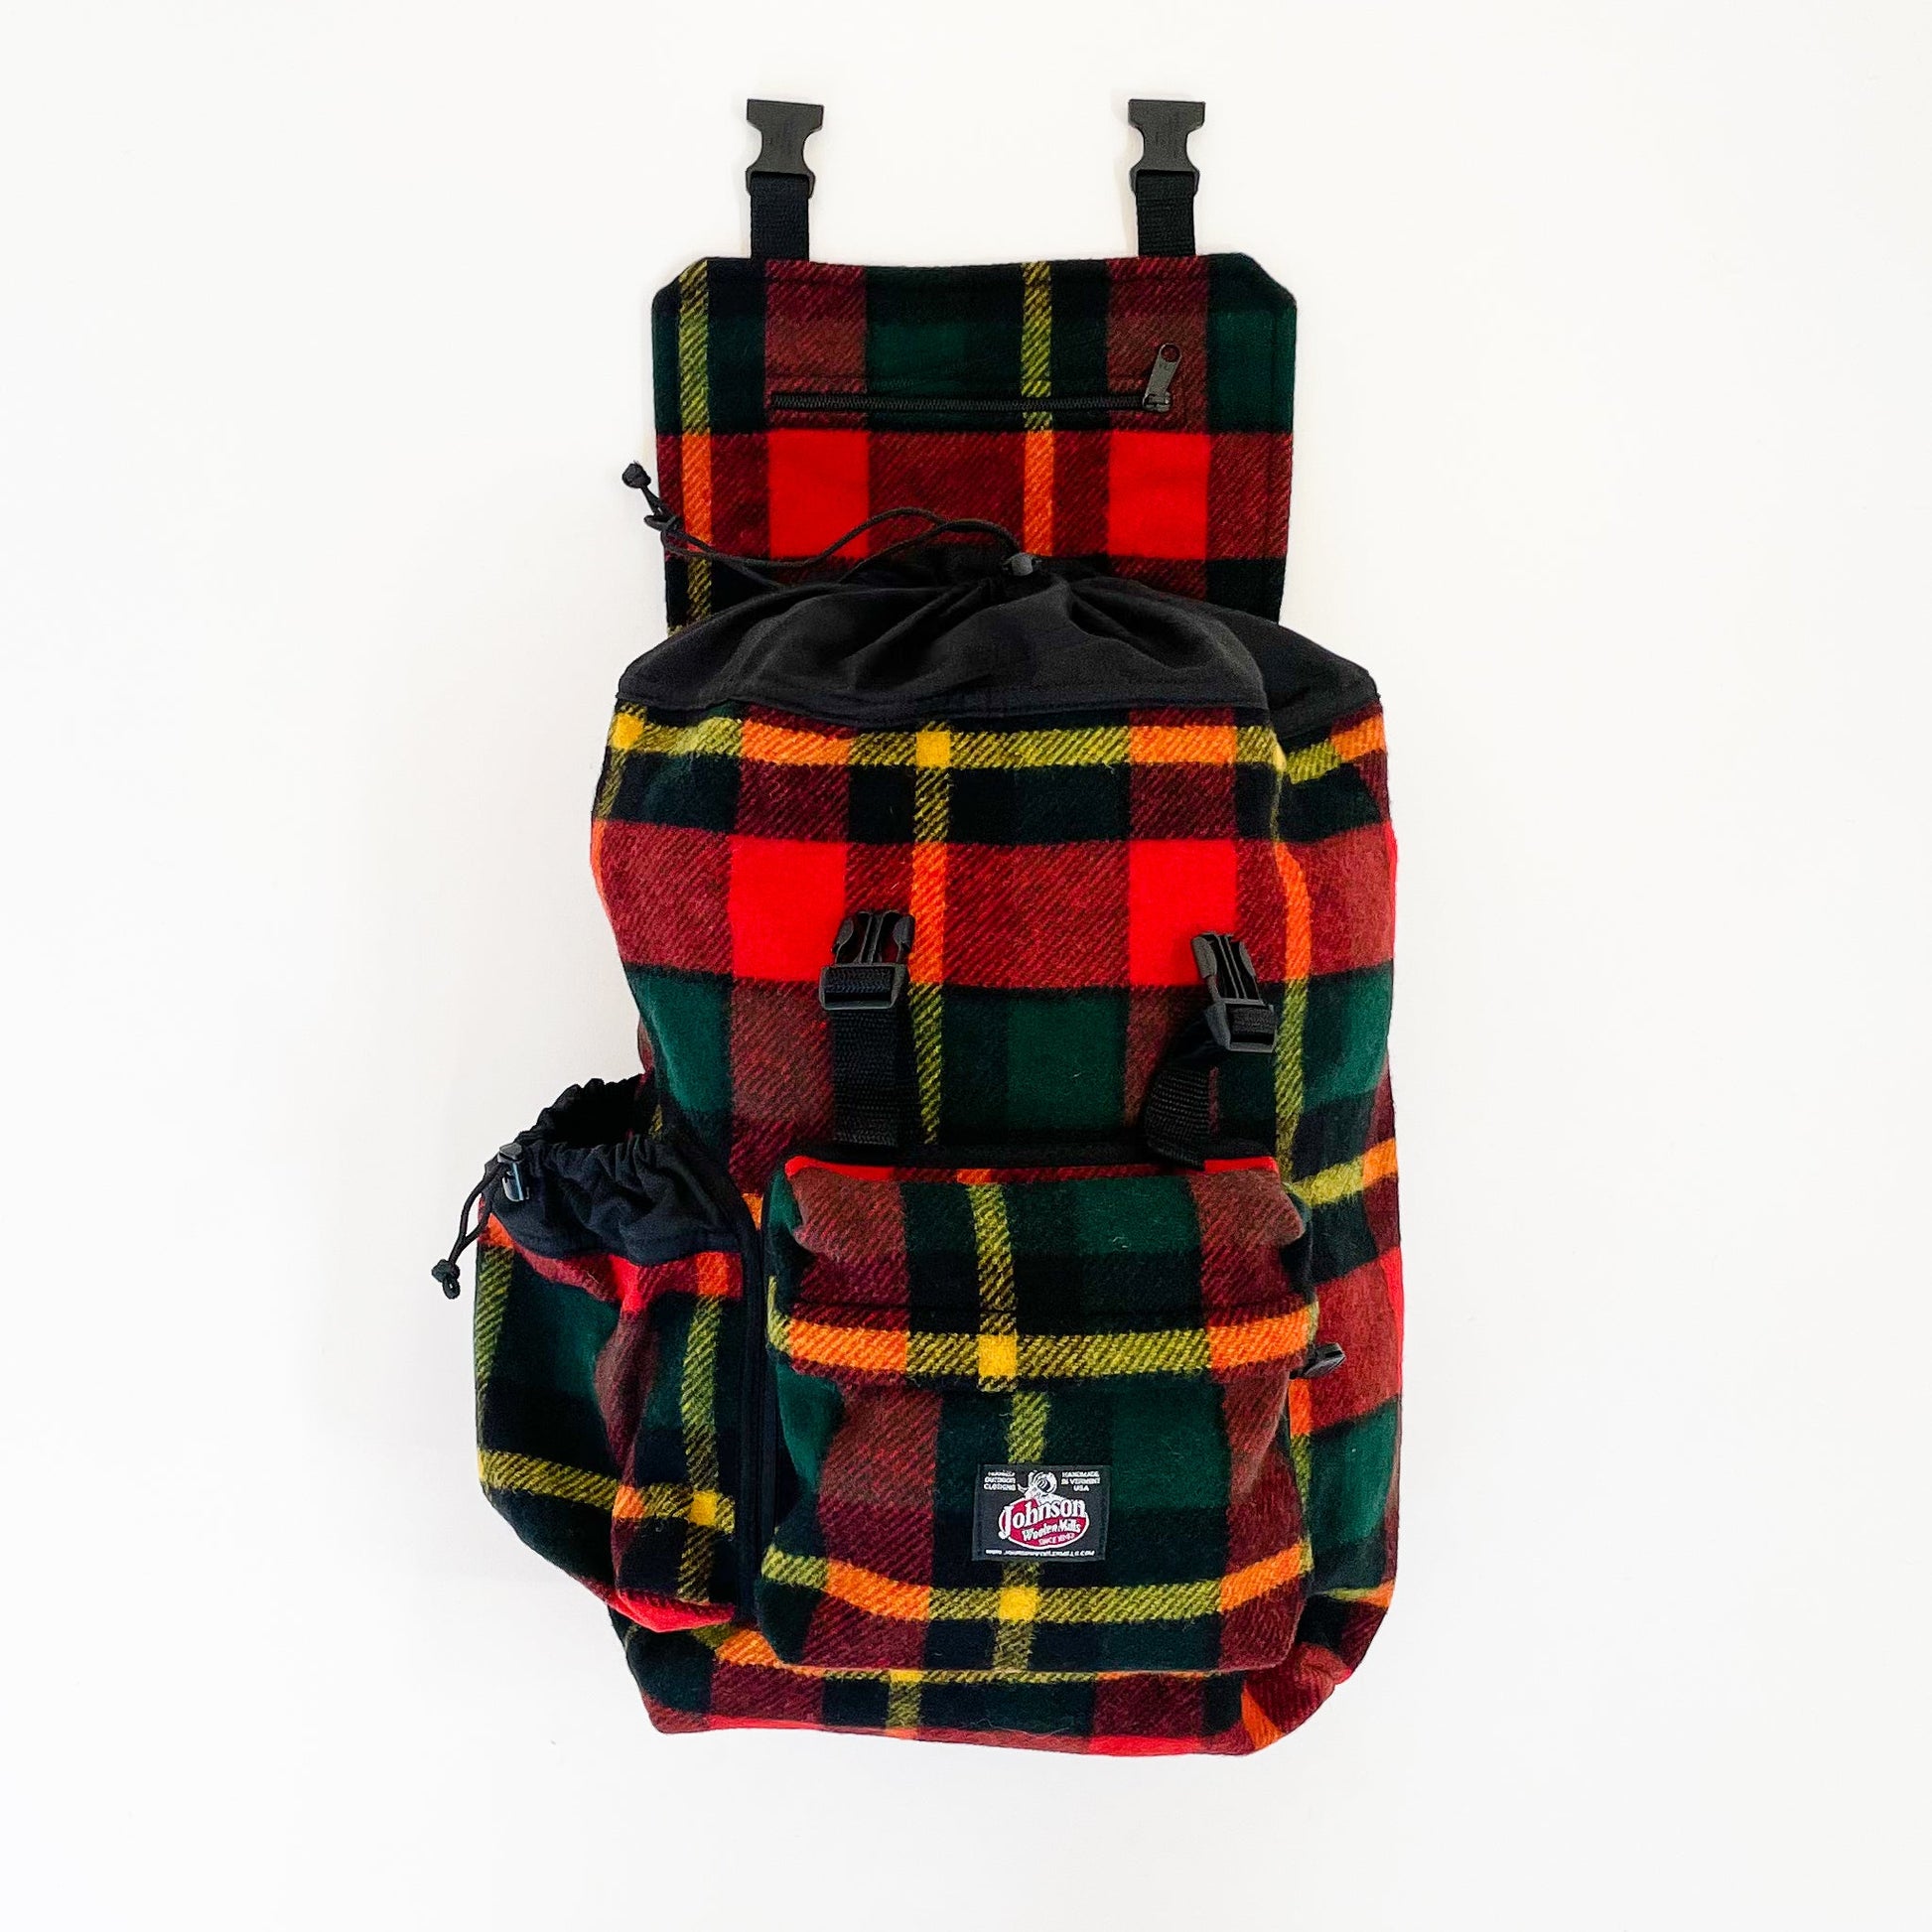 Johnson Woolen Mills Daypack Bright Red/Green/Yellow front view with water bottle in side pocket and top flap open